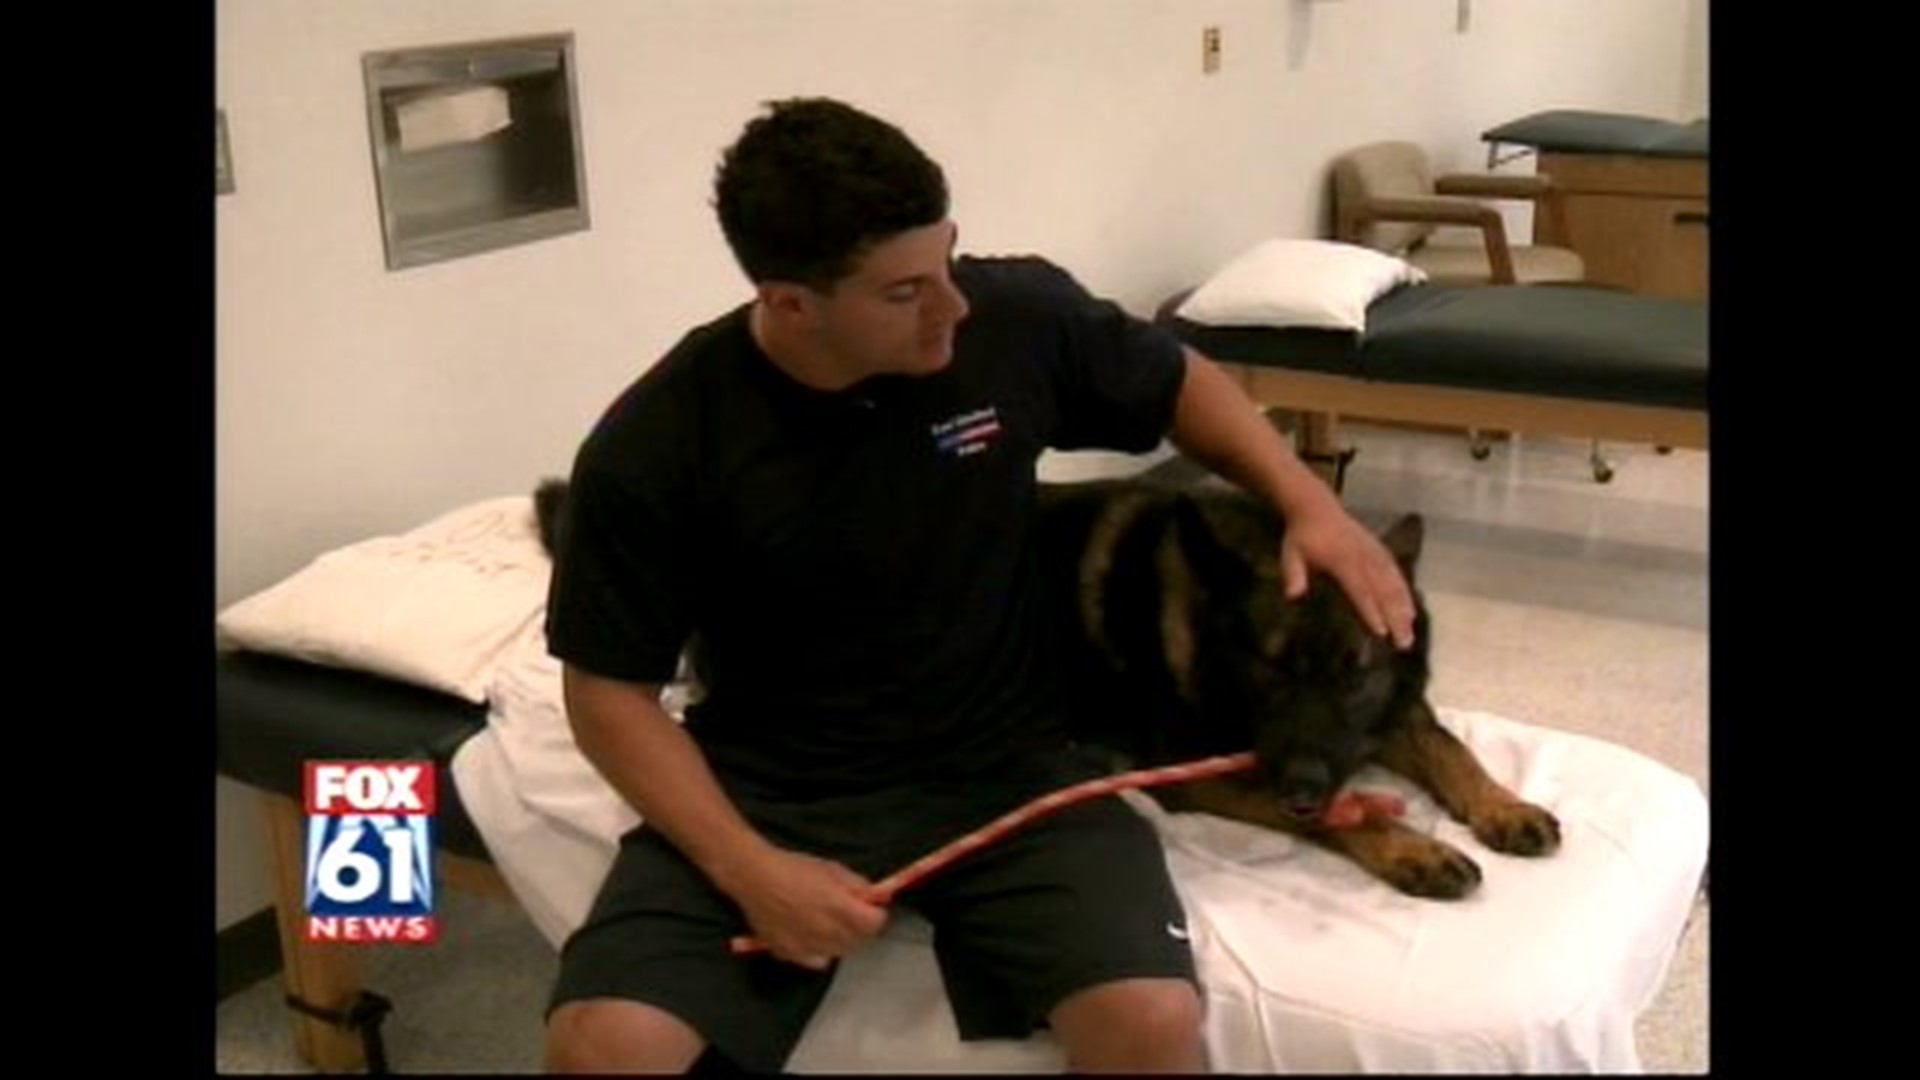 Officer Todd Mona and K9 Primo recover together